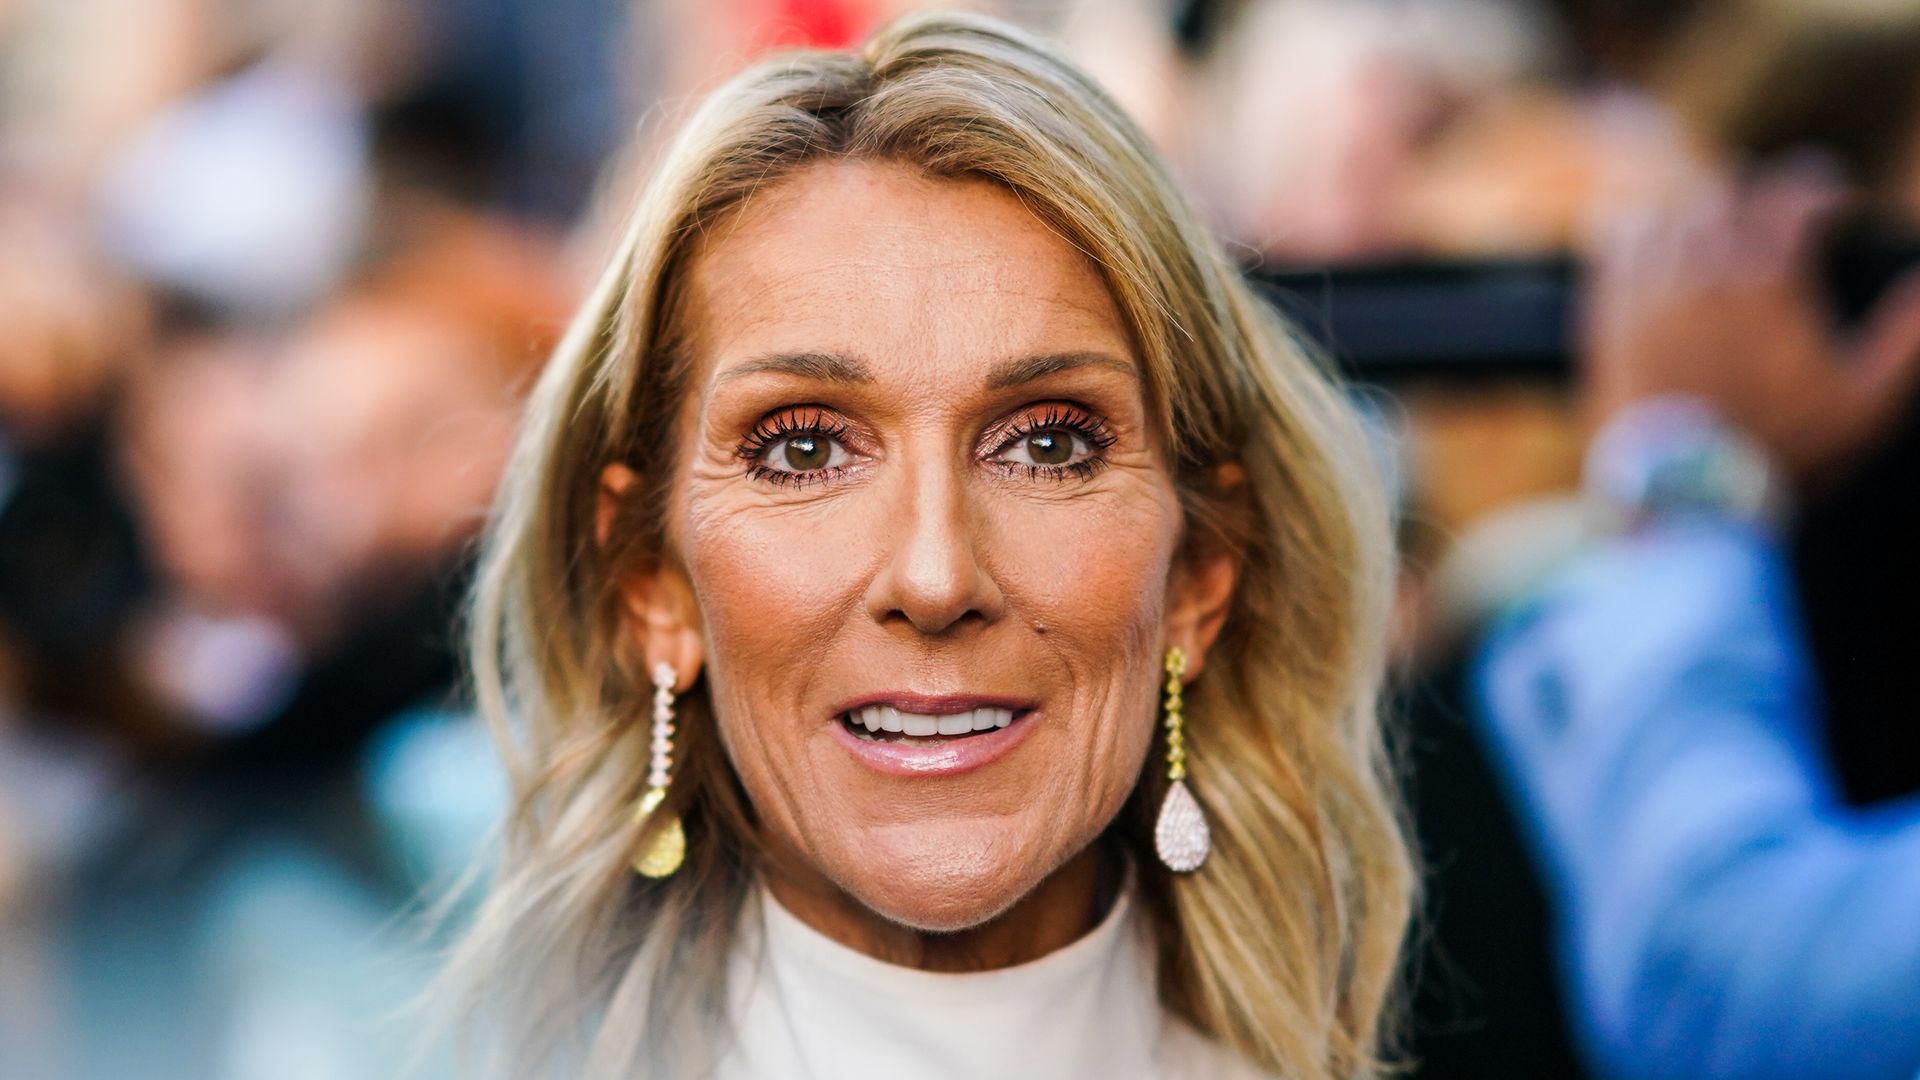 Celine Dion smiling outside Valentino fashion show during during Paris Fashion Week Haute Couture Fall/Winter 2019/2 